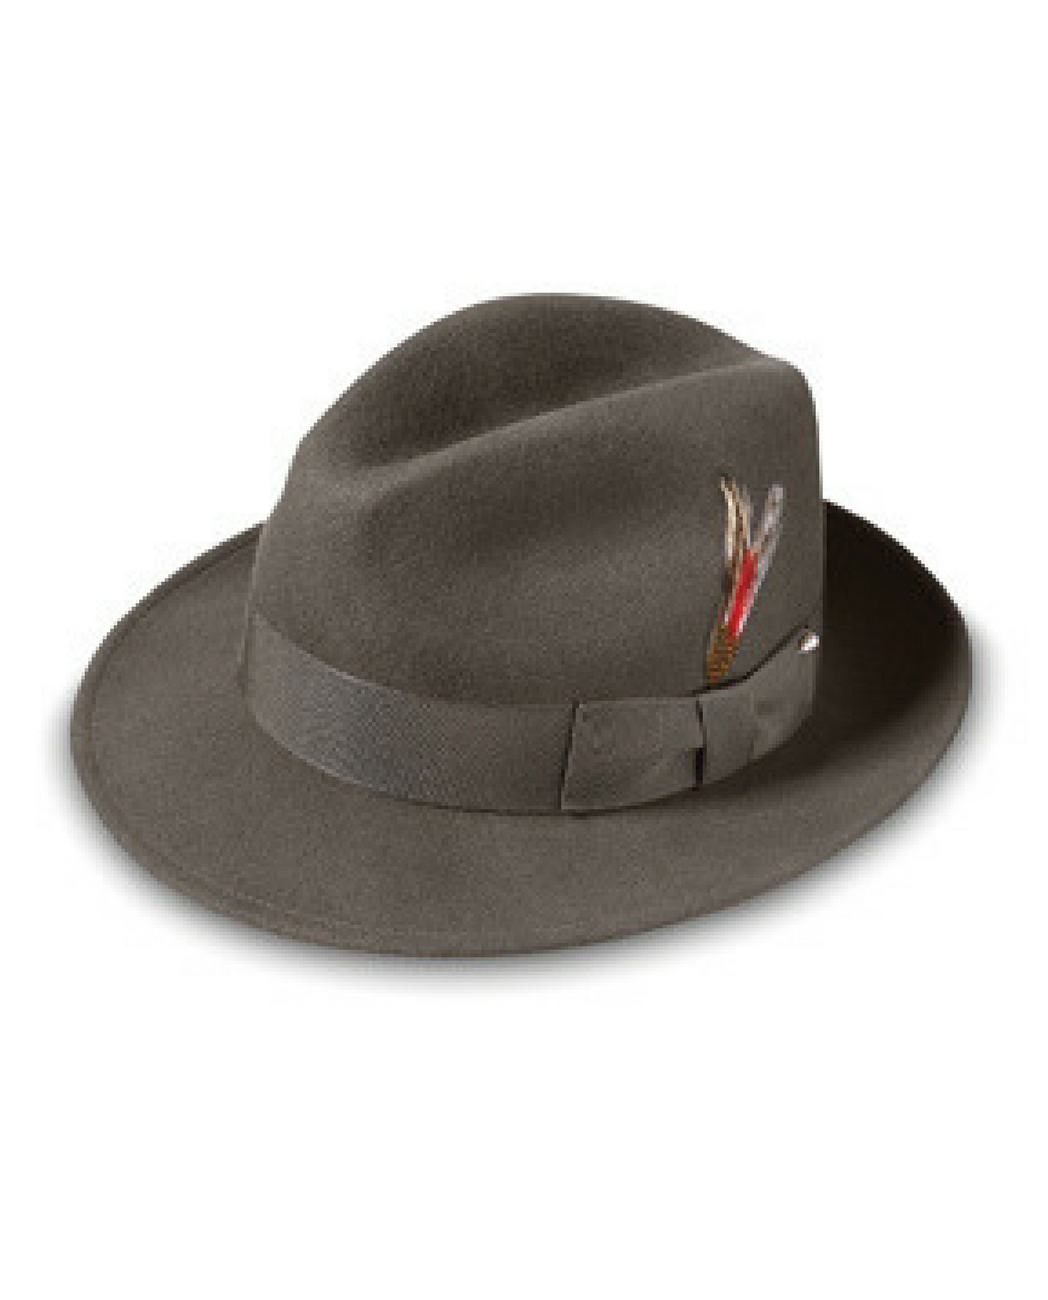 A gray fedora with a grey hatband, accented with a small feather.